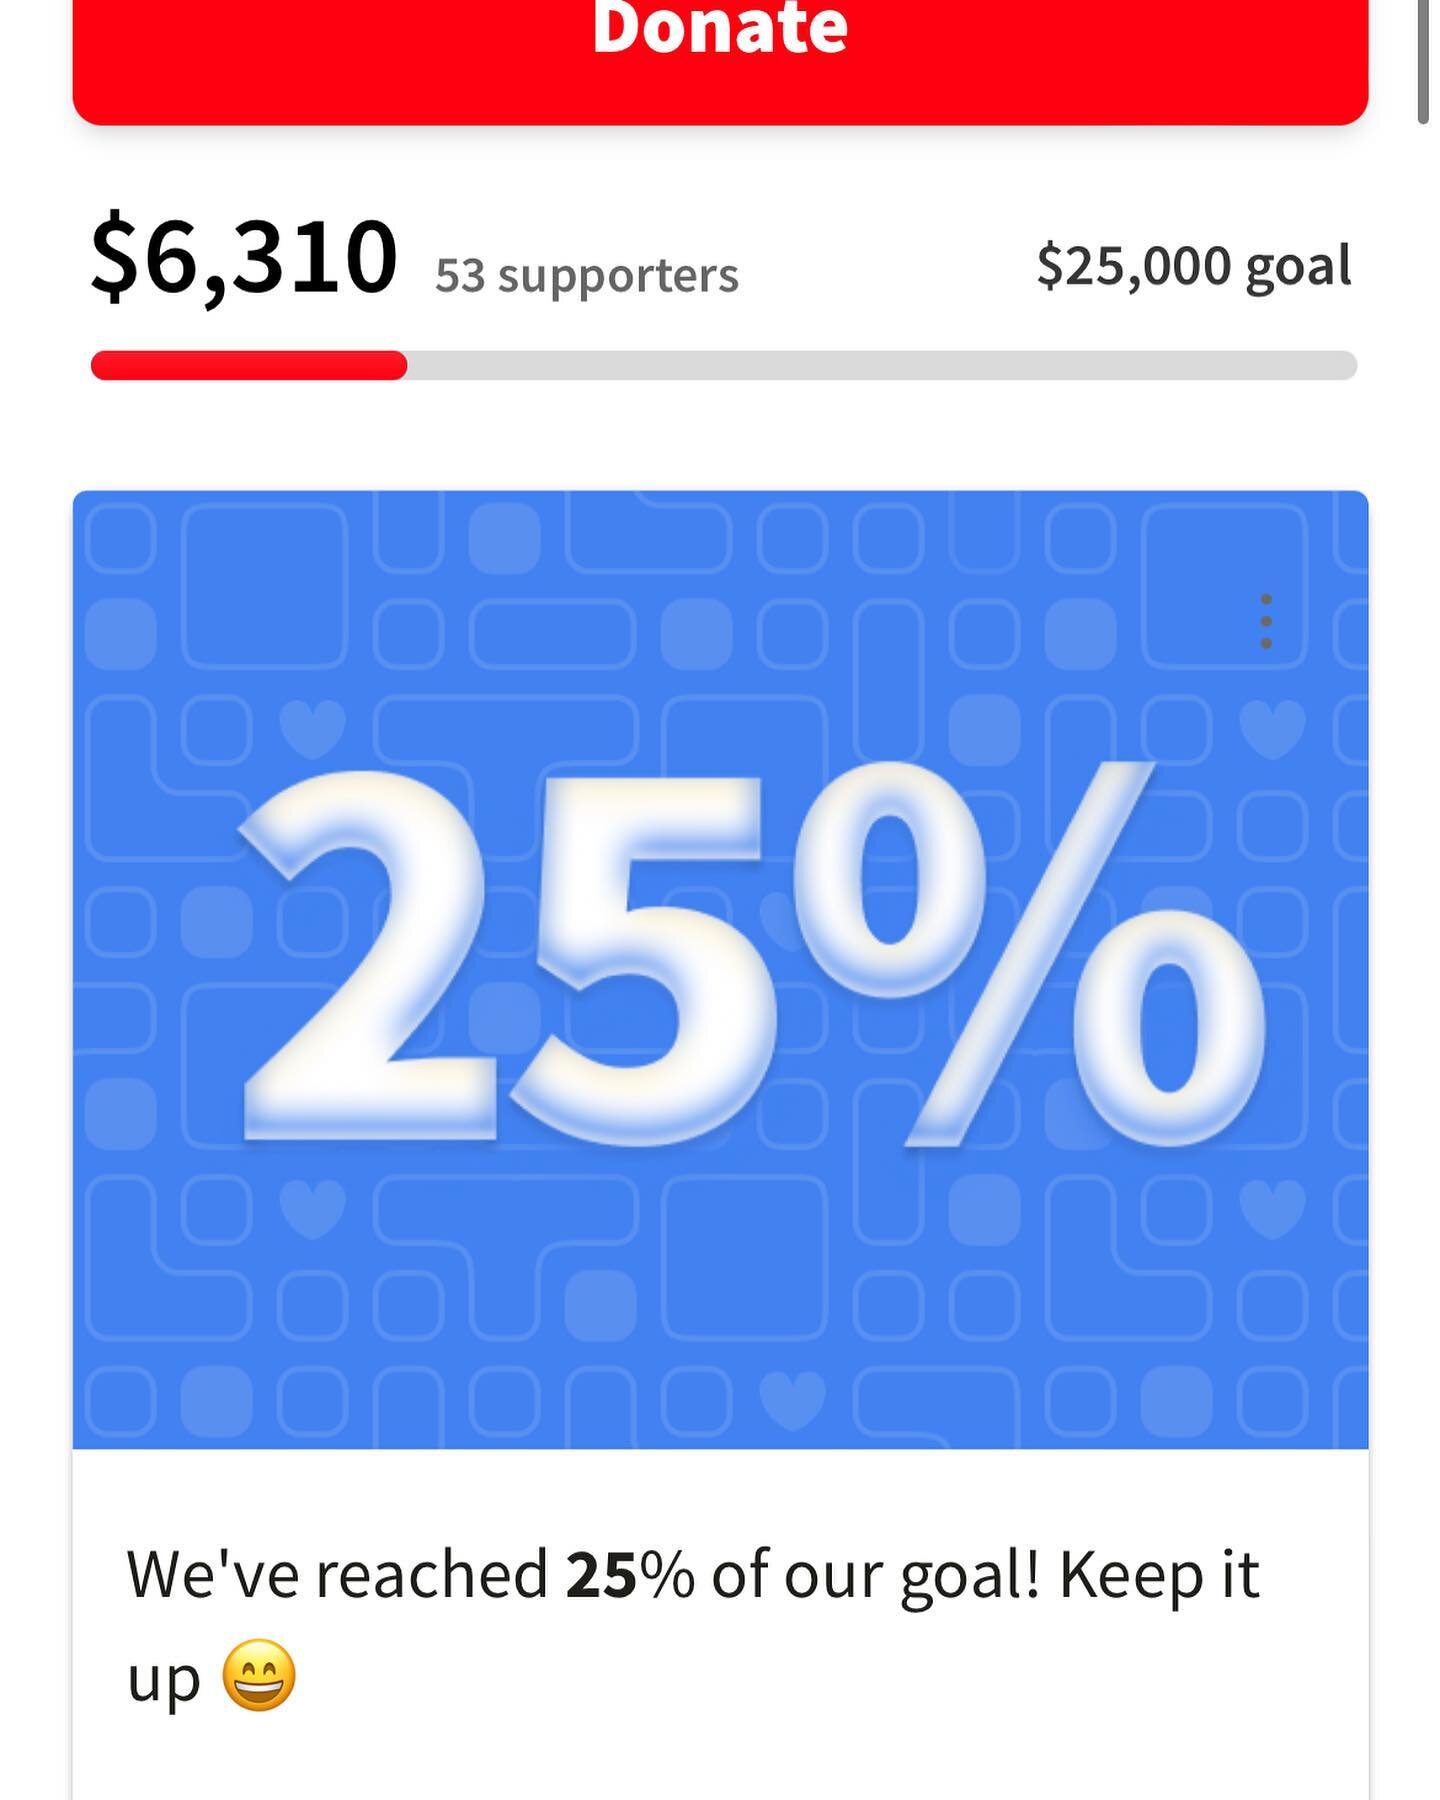 53 incredible donors have gotten us 25% of the to our goal! Thank you so much for your generosity and support of these amazing girls. We can theoretically fund the project with 150 more donors! Please spread the word about @sacredvalleyorg to friends